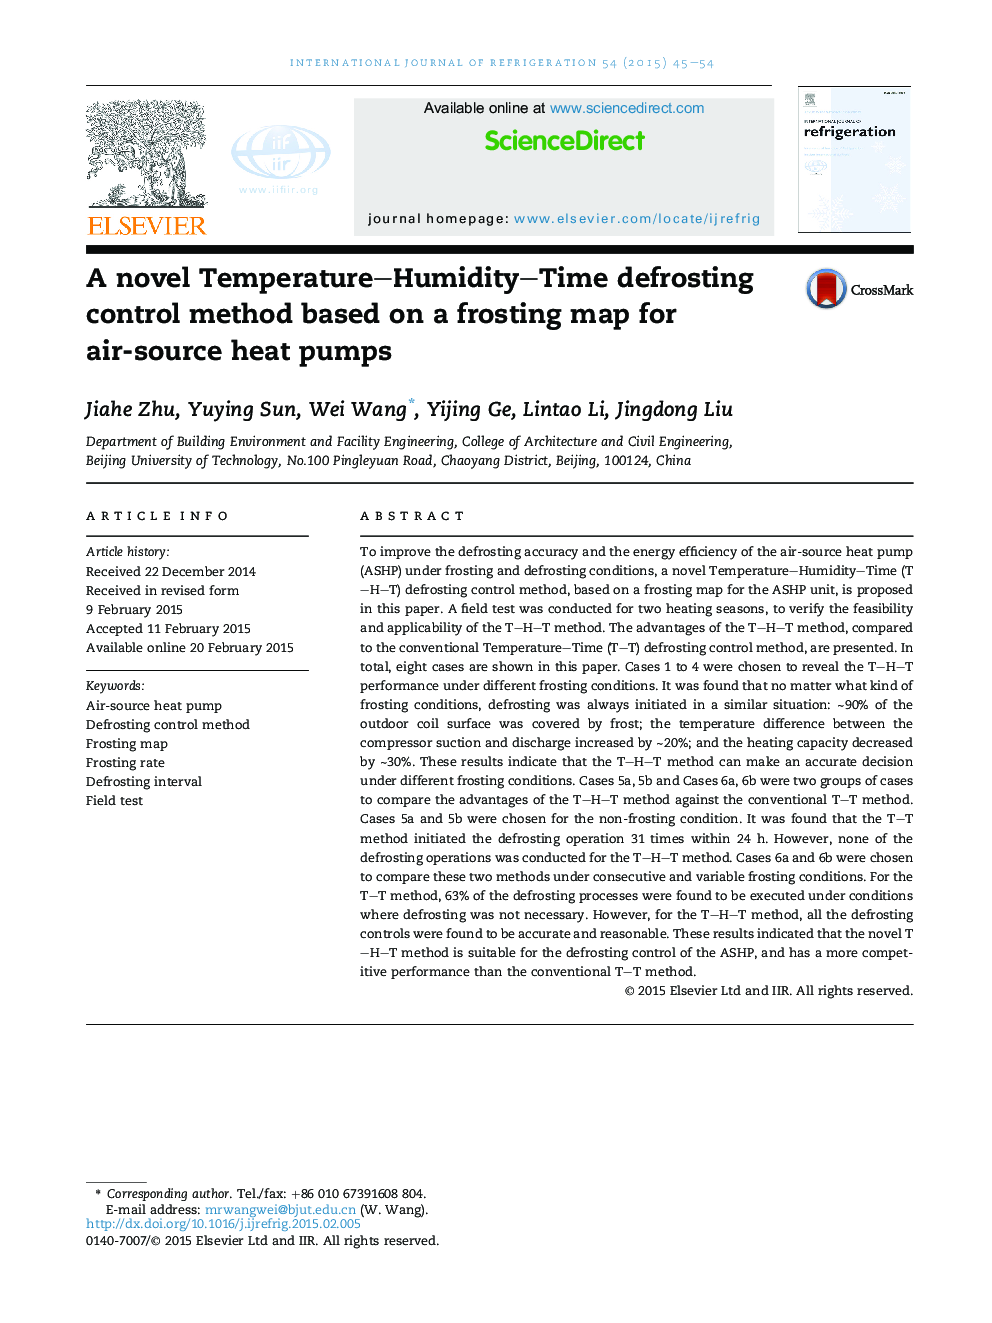 A novel Temperature–Humidity–Time defrosting control method based on a frosting map for air-source heat pumps